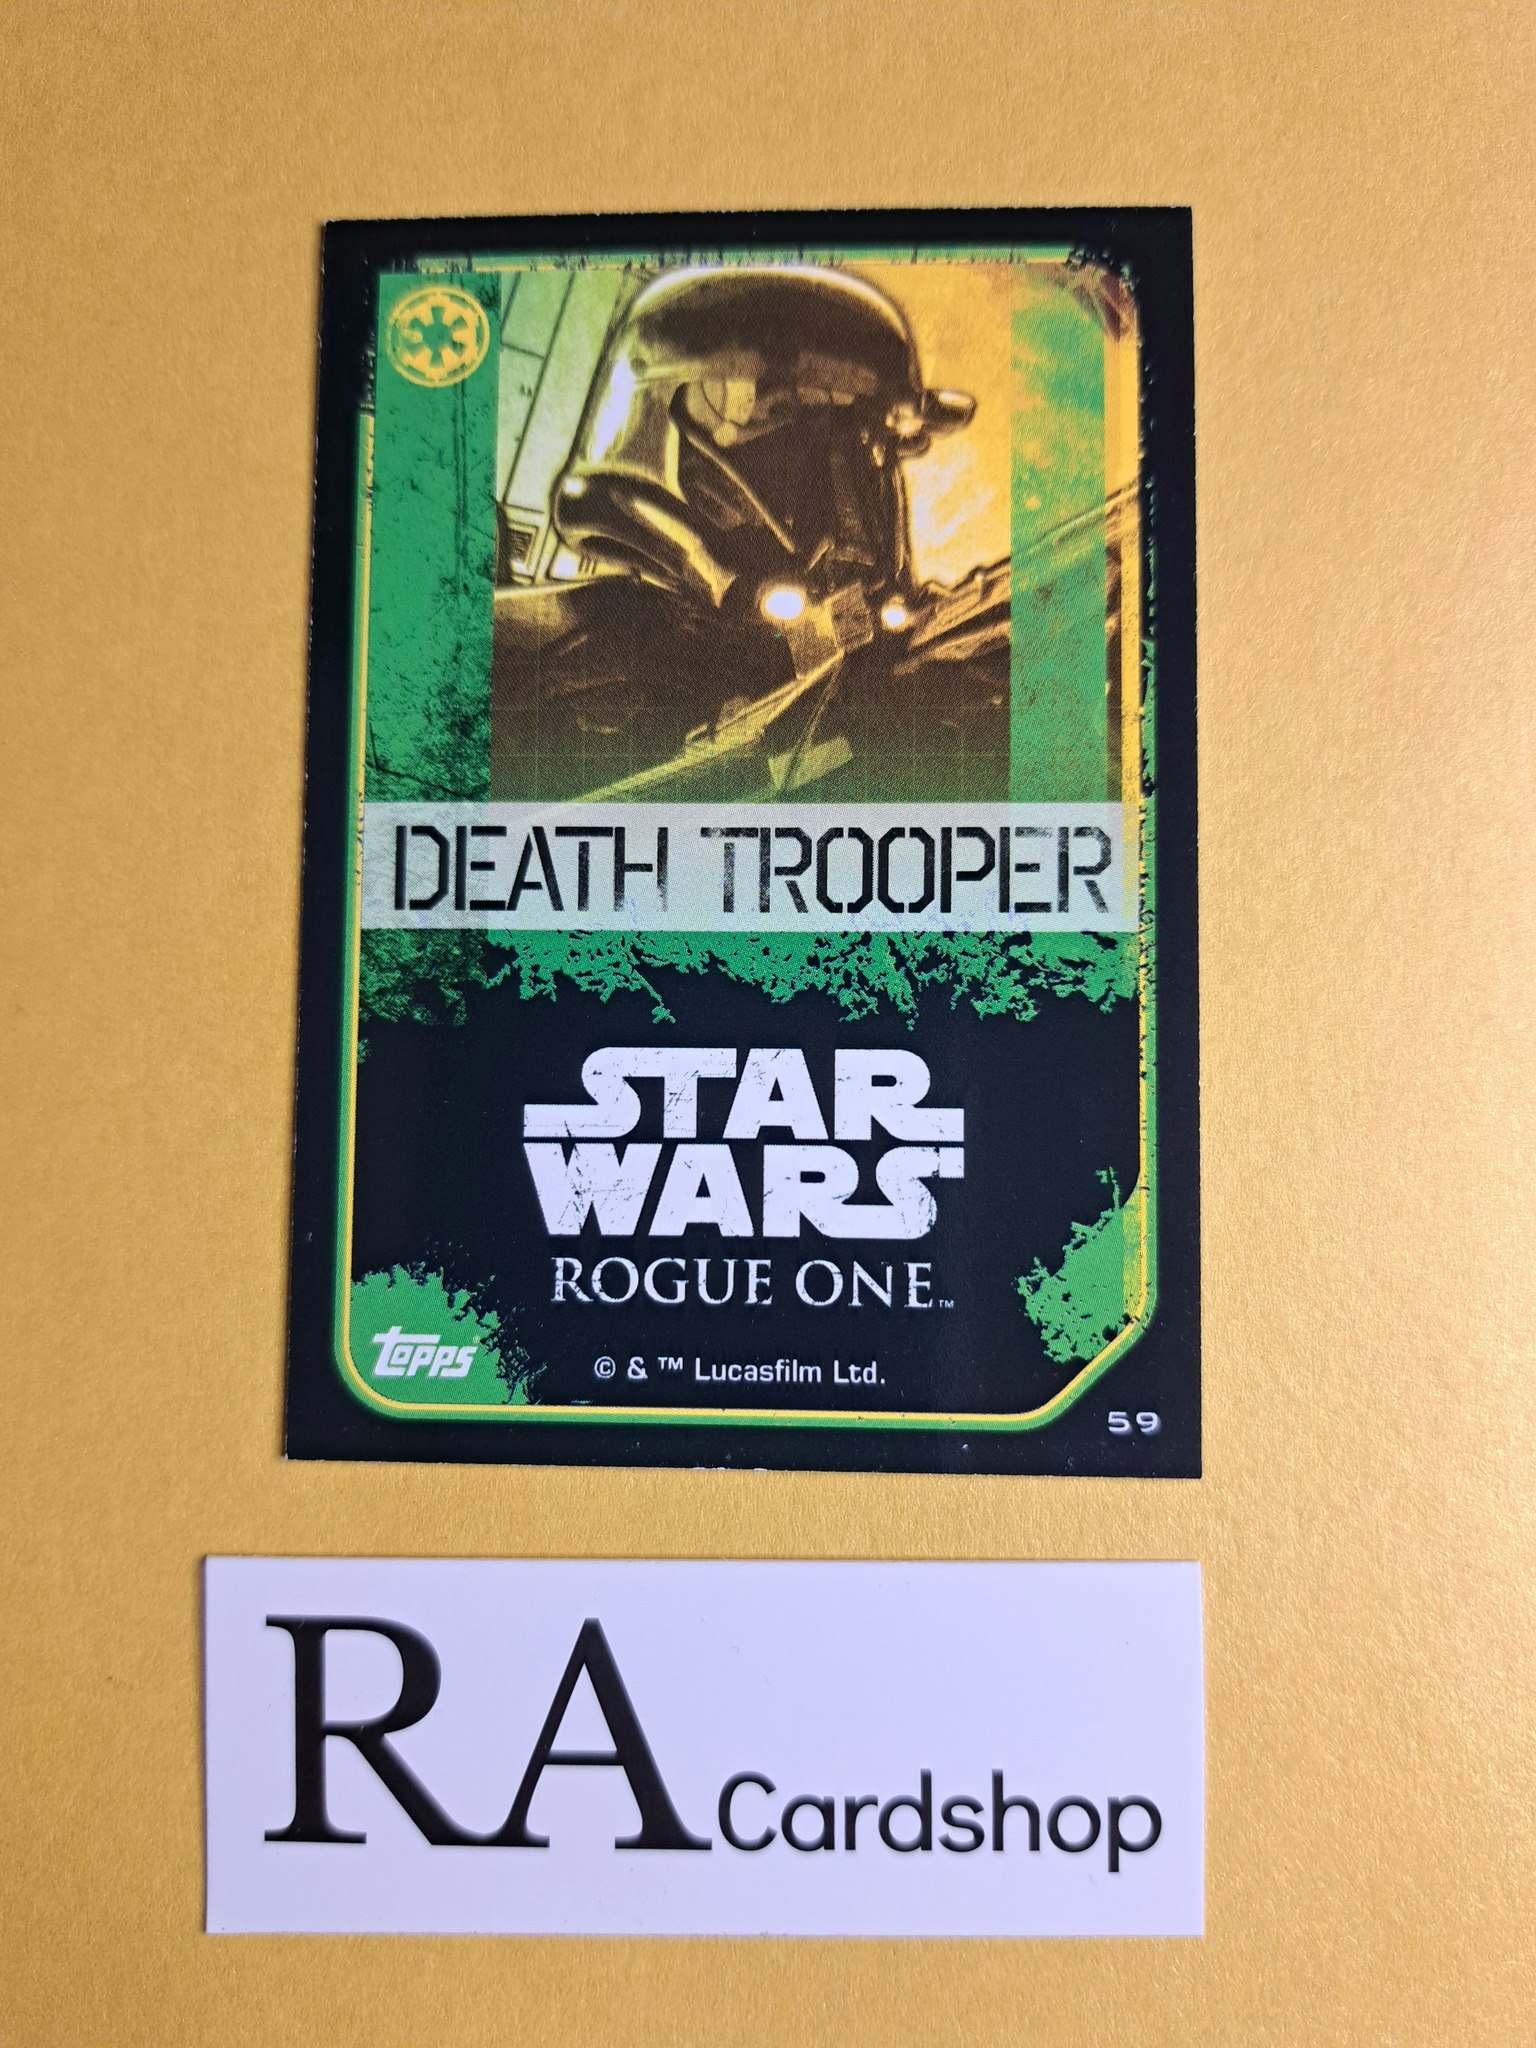 Death Trooper #59 Rogue One Topps Star Wars